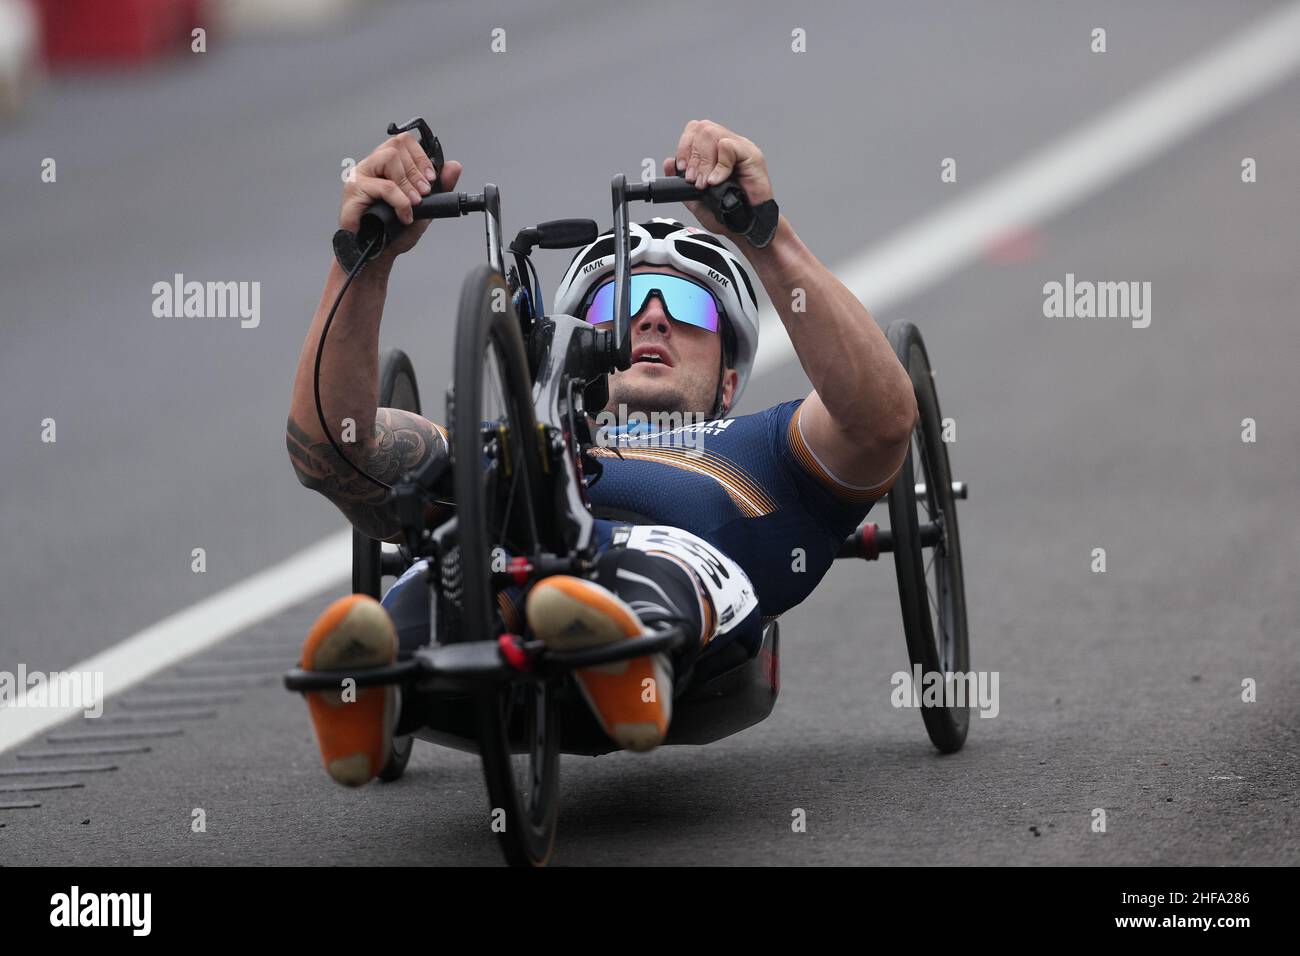 Ballarat, Australia, 15 January, 2022. Alexander Welsh rides during the Para-Cycling & Intellectually Impaired Road Race (Para-MH3) as part of the Australian Road National Championships on January 15, 2022 in Ballarat, Australia. Credit: Brett Keating/Speed Media/Alamy Live News Stock Photo